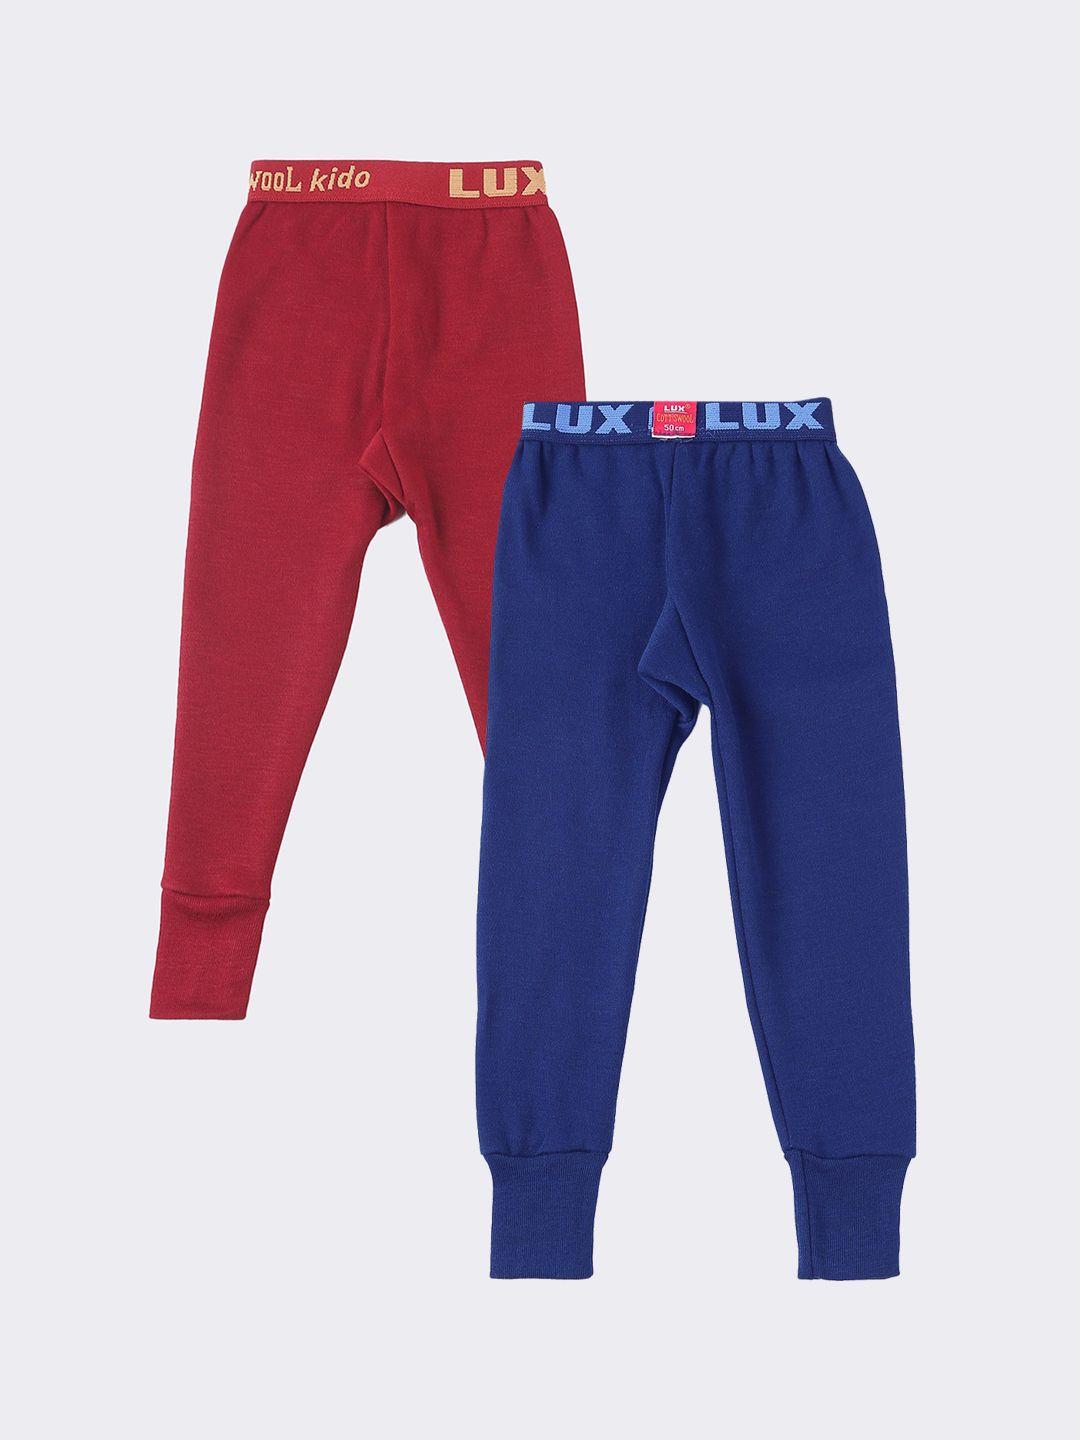 lux-cottswool-boys-pack-of-2-blue-&-marron-solid-cotton-thermal-bottoms